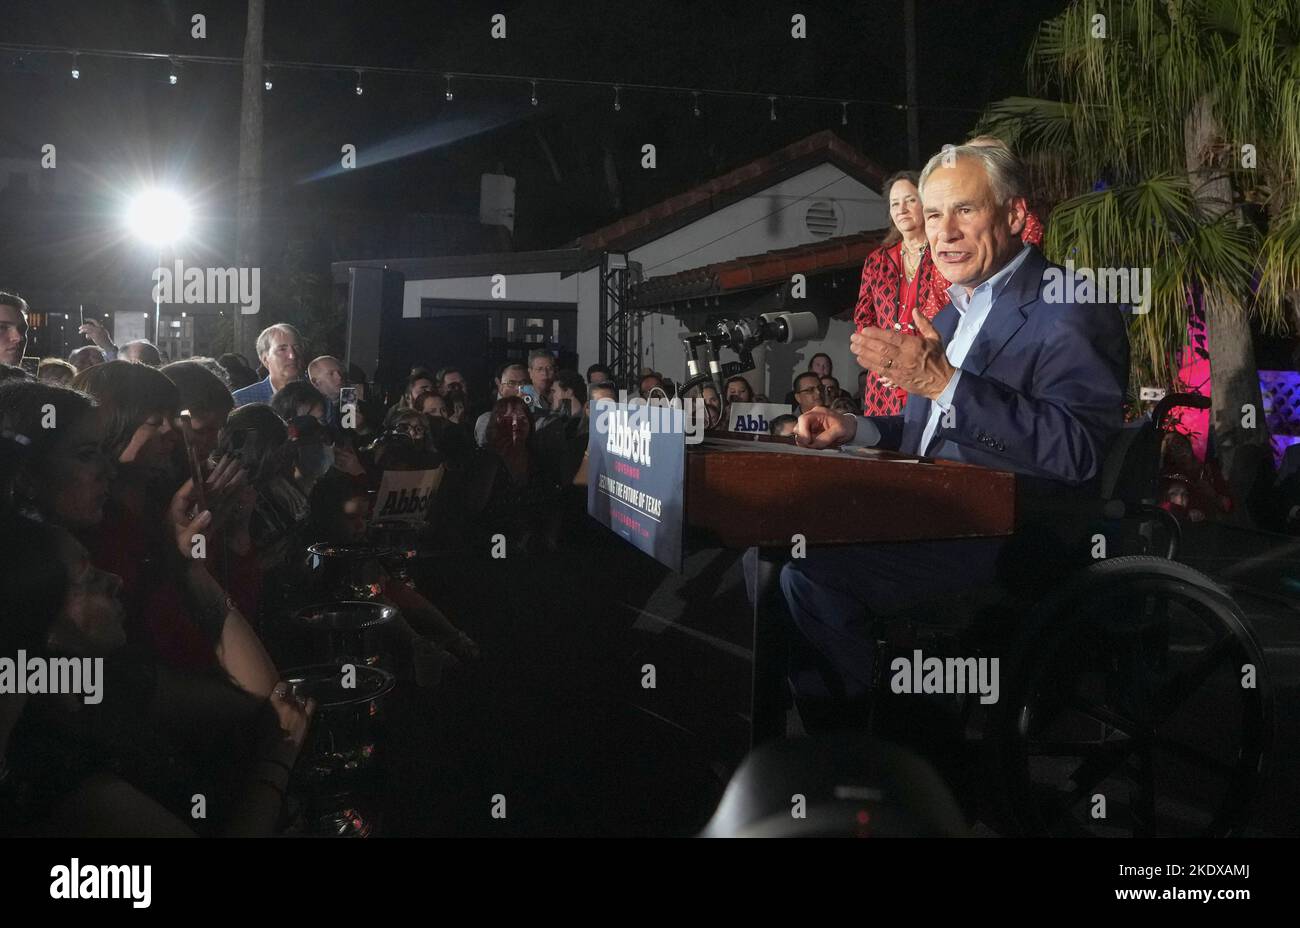 McAllen Texas USA, November 8 2022: Texas Governor GREG ABBOTT, joined onstage by his wife, Cecelia, revels in a re-election victory over Democratic challenger Beto O'Rourke during an election-night watch party. ©Bob Daemmrich Stock Photo